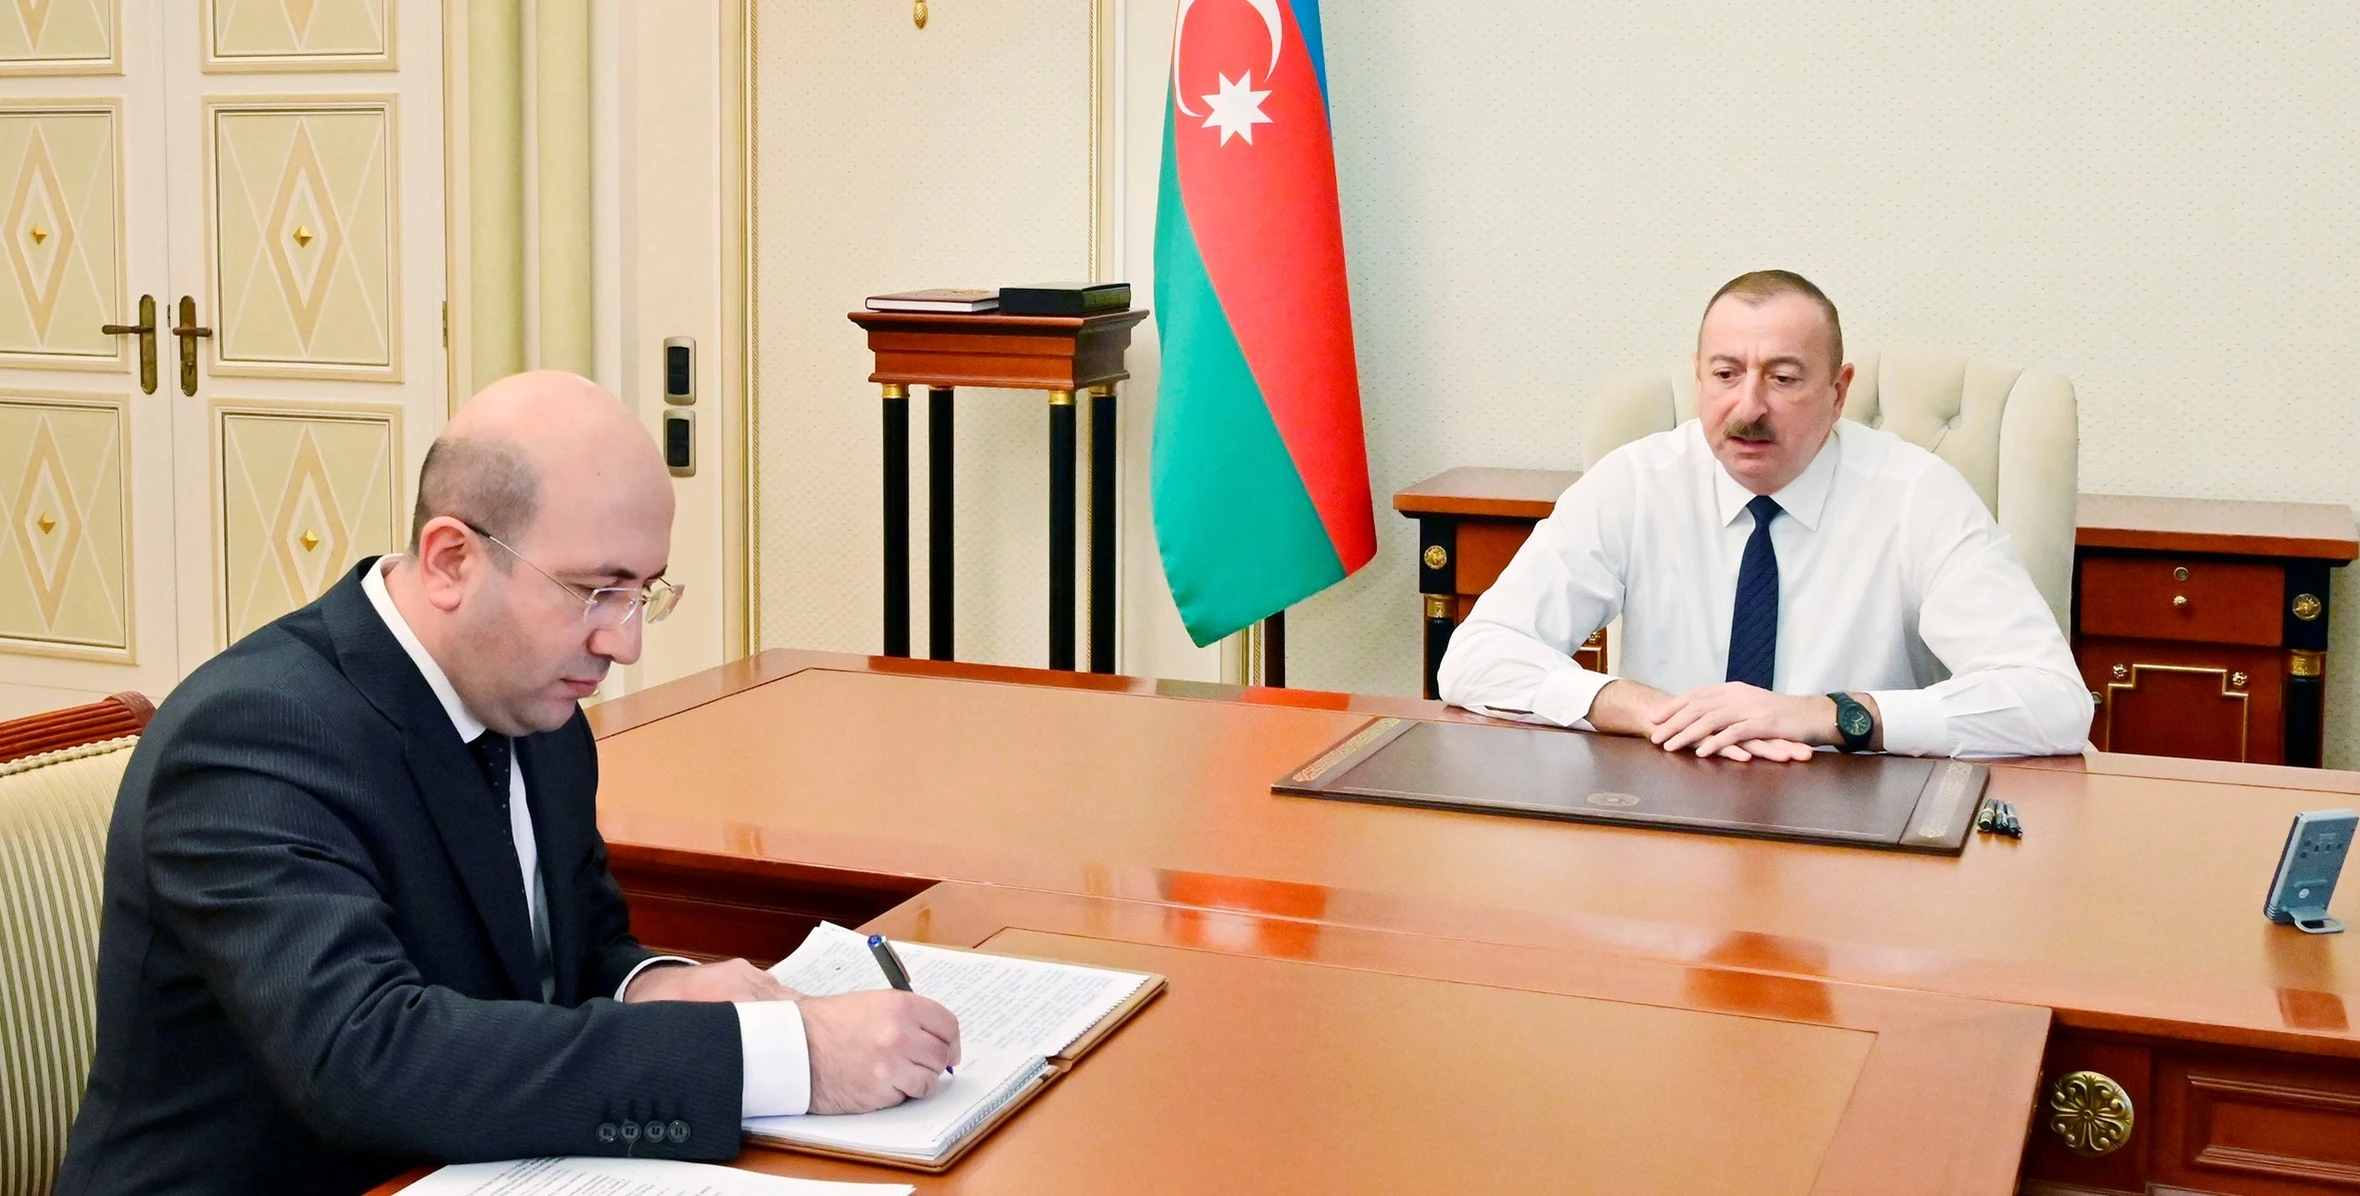 President Ilham Aliyev received Anar Guliyev in connection with his appointment as chairman of State Committee on Urban Planning and Architecture